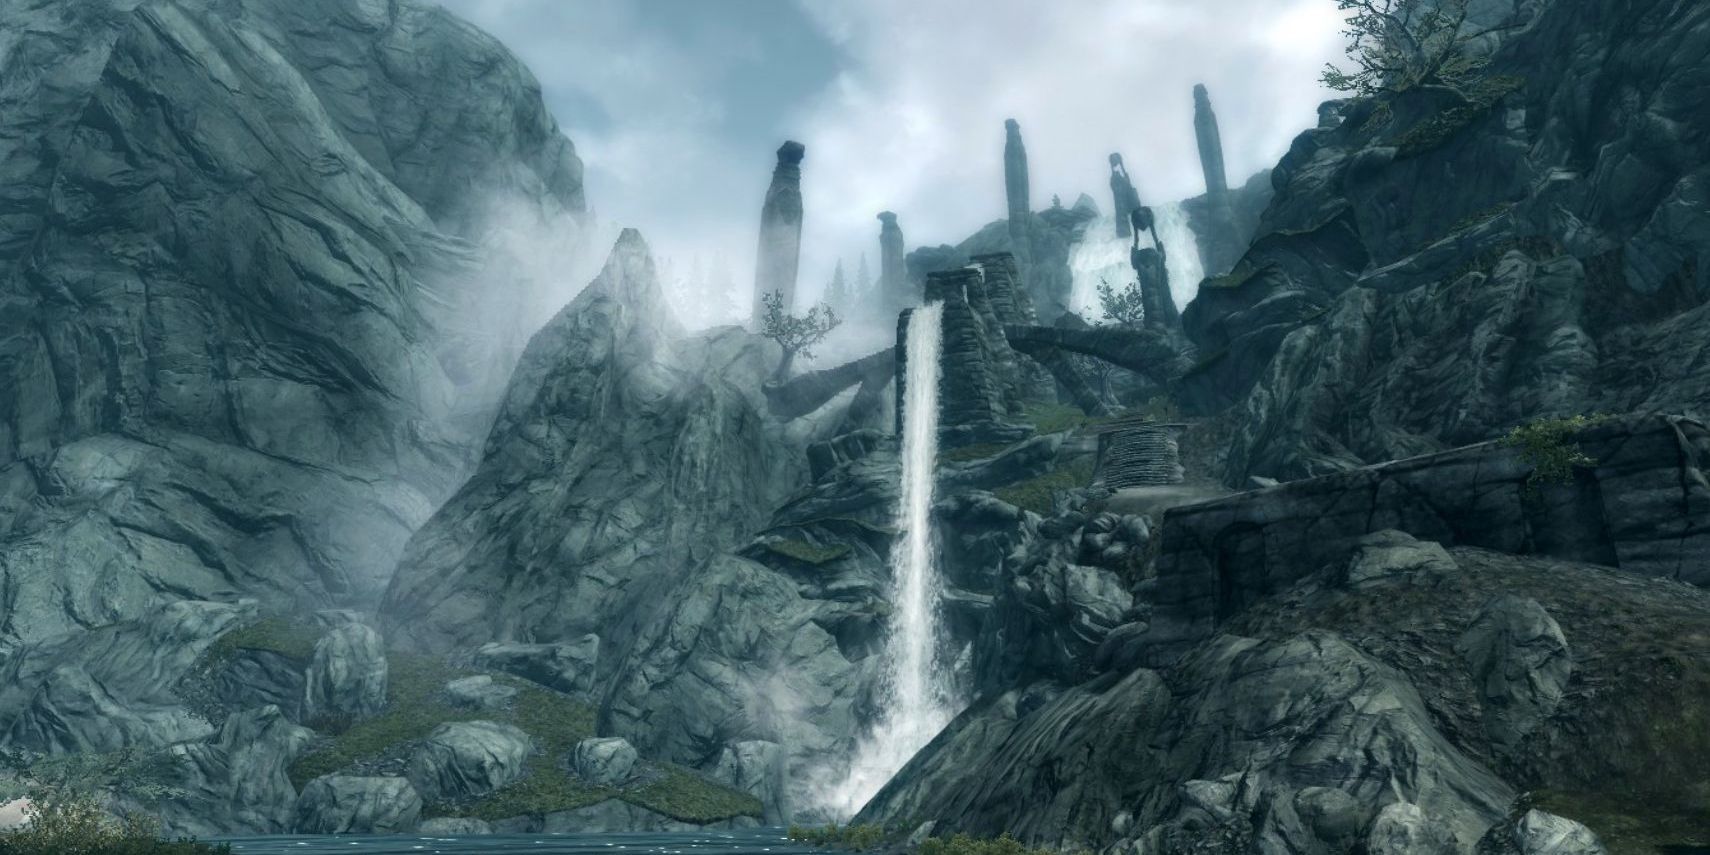 A screenshot looking up toward the summit of Skyrim's Bard's Leap, where water runs out of the ruins in a small waterfall.